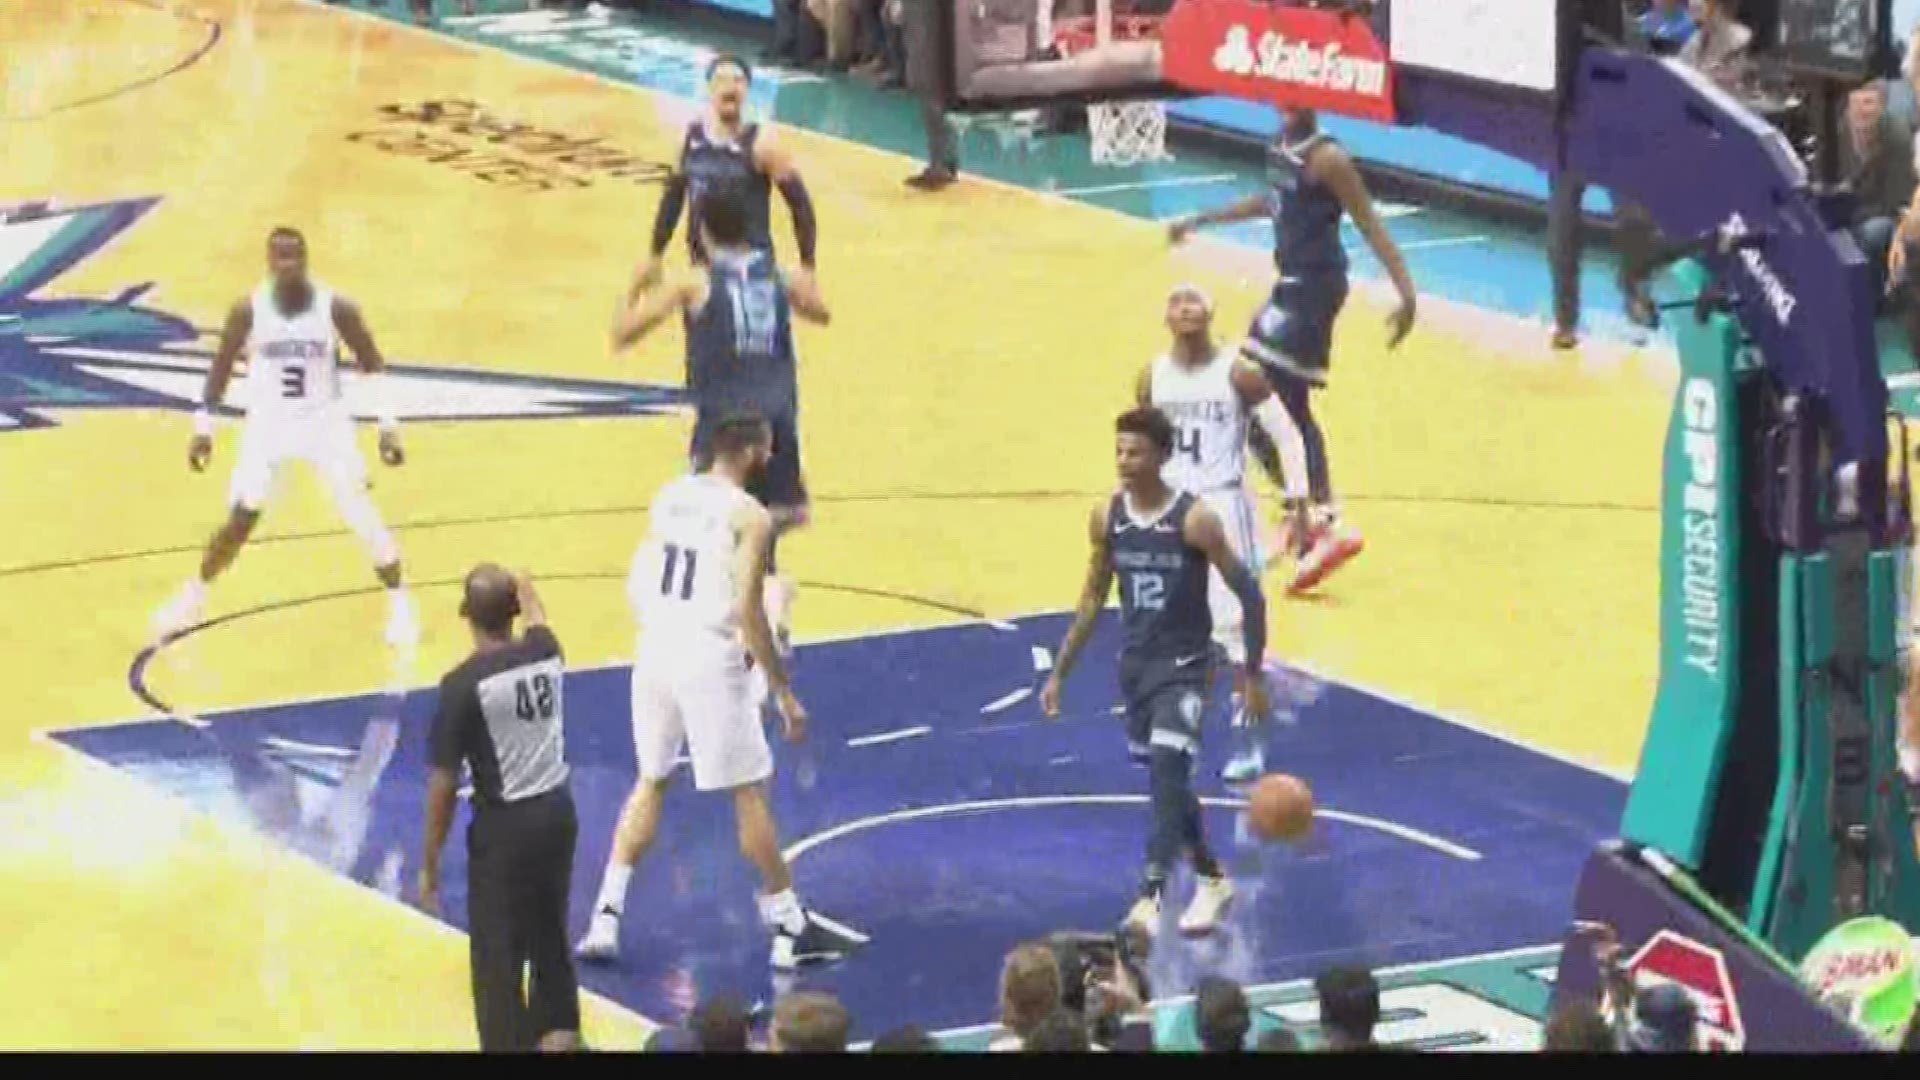 Former Crestwood star Ja Morant scores the game-winner for the Memphis Grizzlies in their showdown with the Hornets.